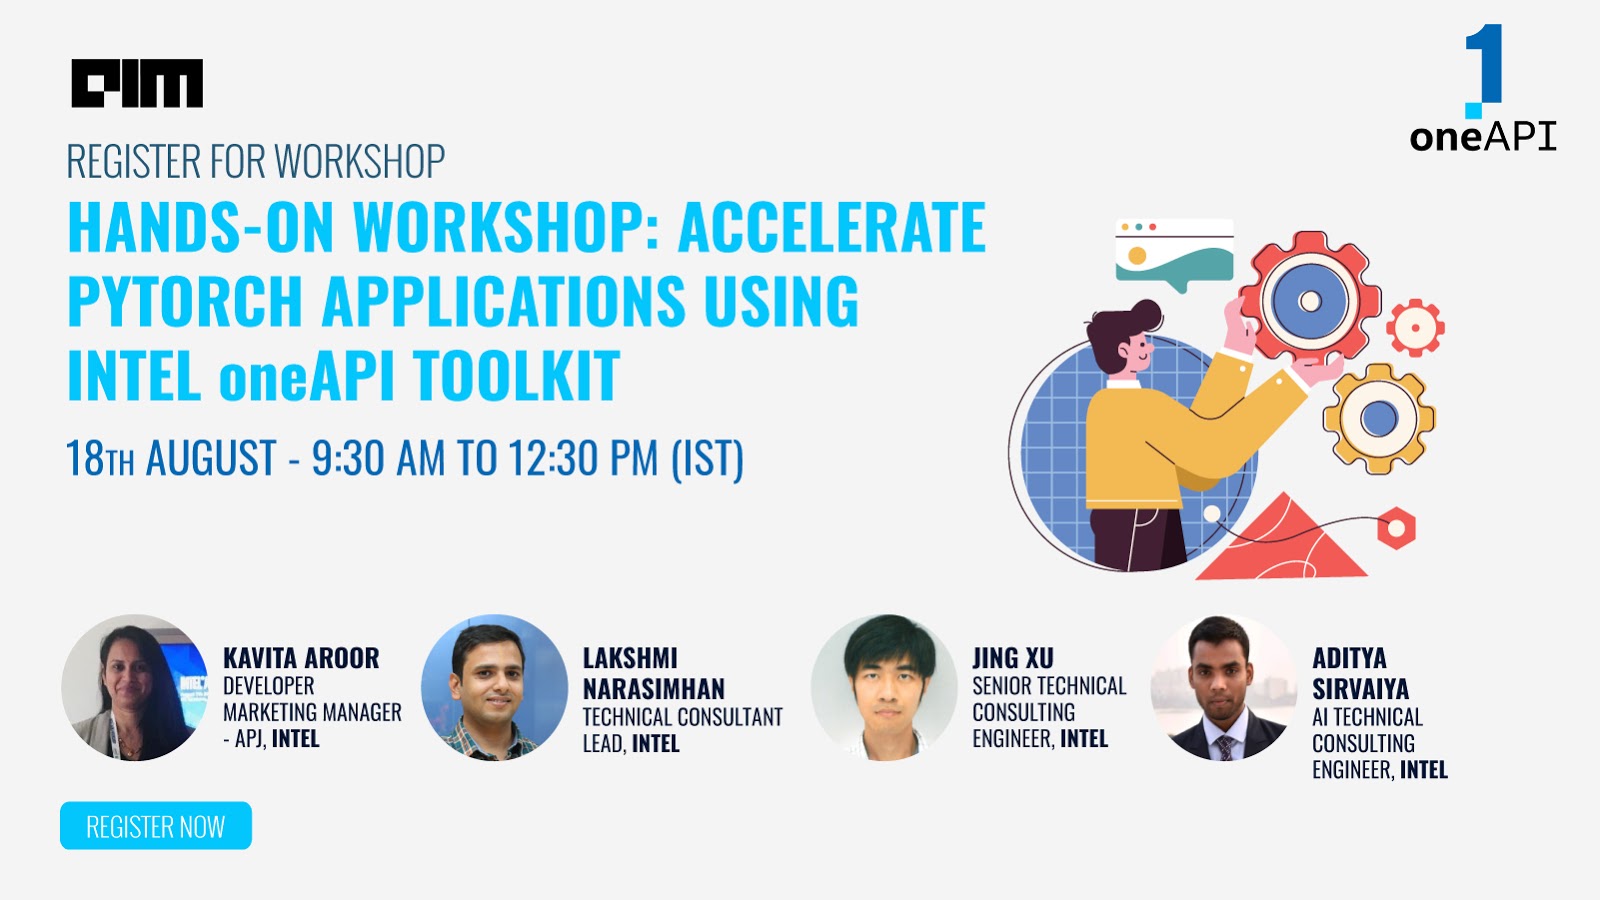 Hands-On Workshop: Accelerate PyTorch Applications Using Intel oneAPI Toolkit